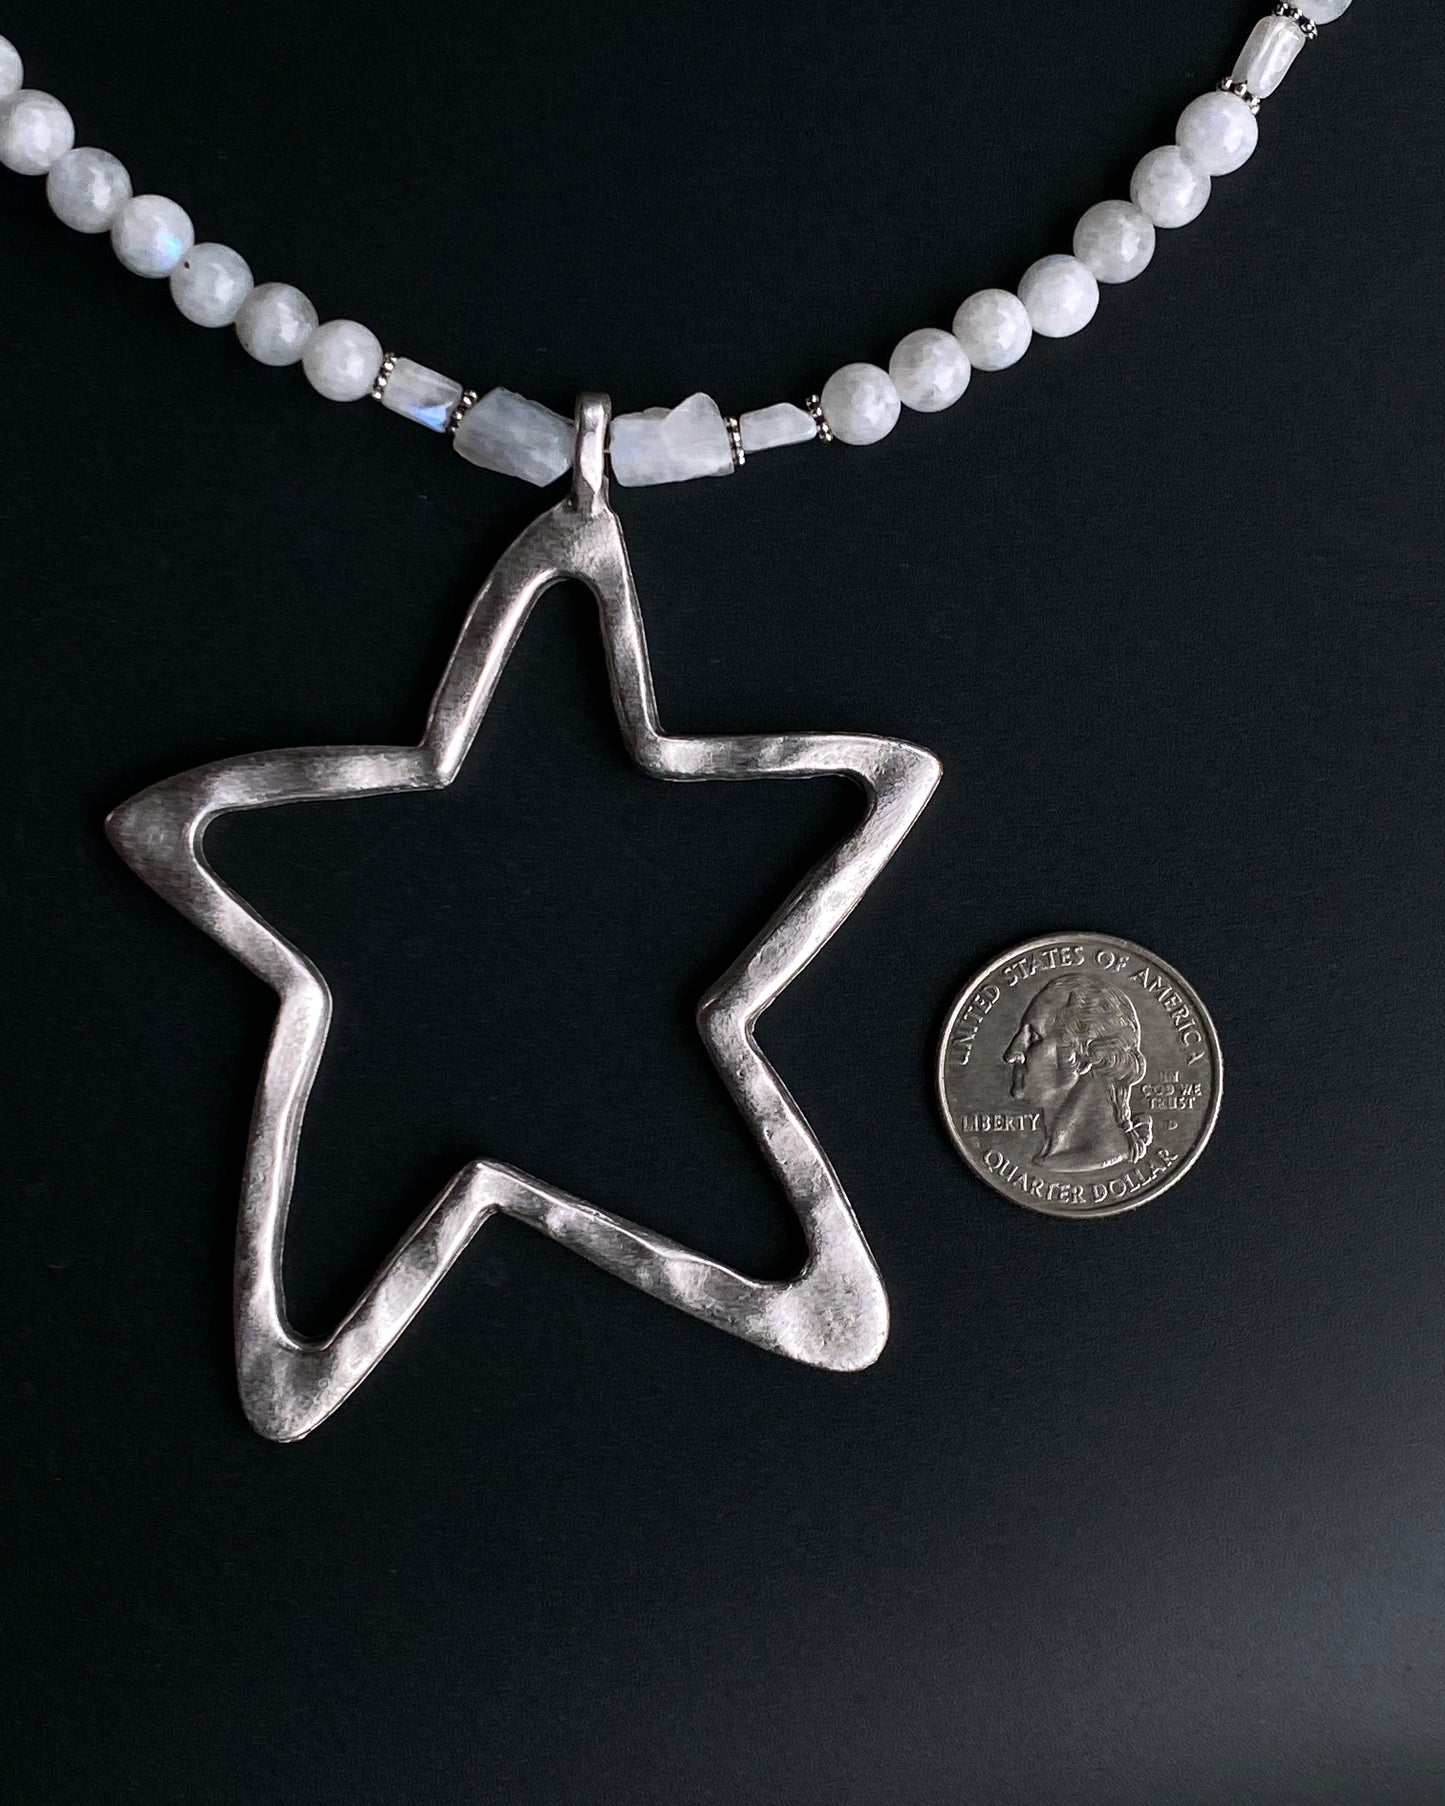 Moonstone beaded and Star necklace